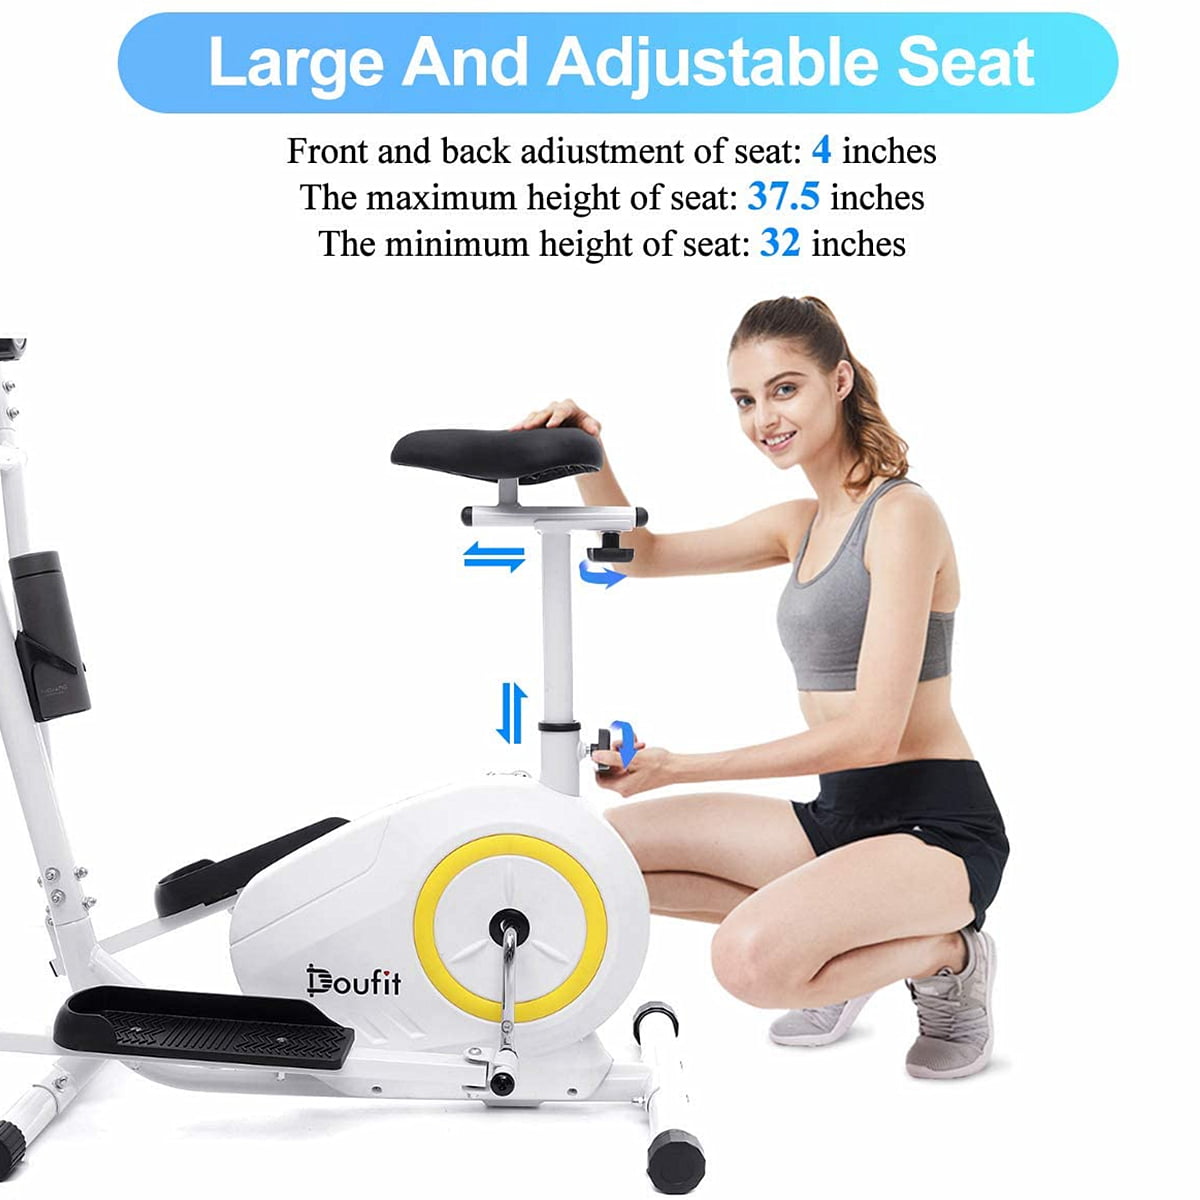 Doufit Elliptical Machine for Home Use EM-01 Eliptical Exercise Machine for Fitness Gym Workout Indoor Adjustable Magnetic Elliptical Cross Trainer with LCD Monitor and Pulse Sensors